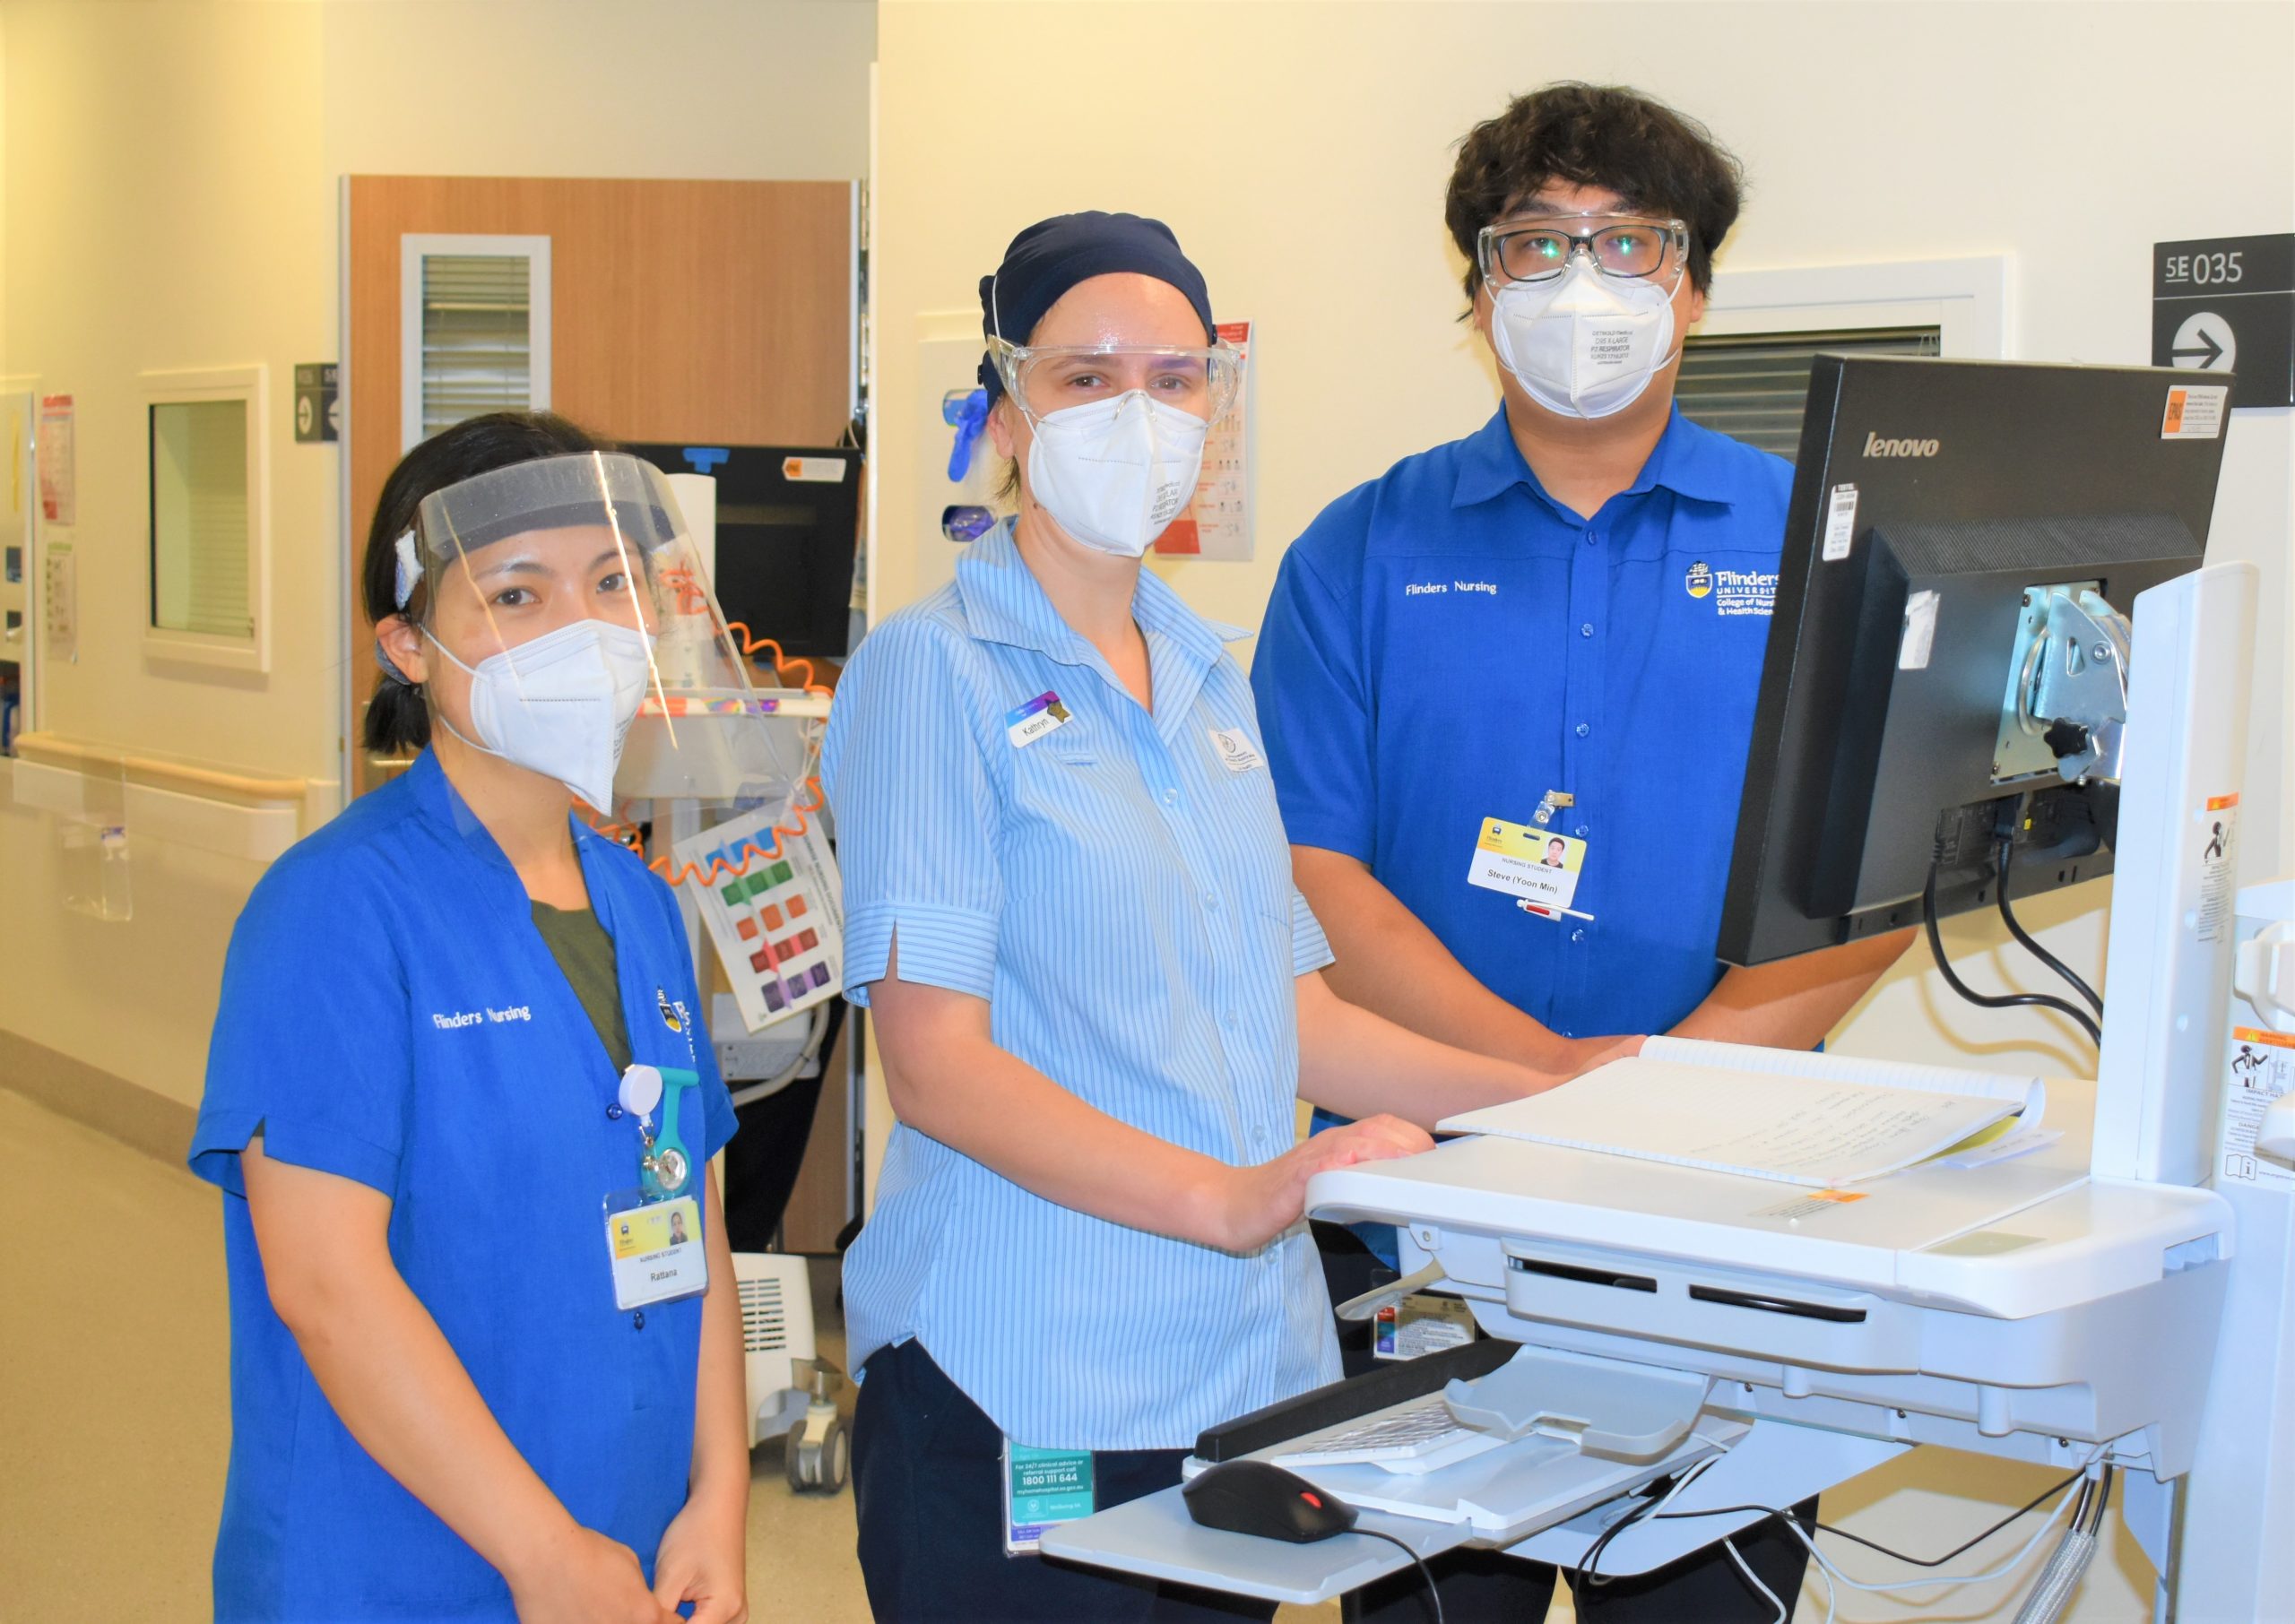 Student nurses benefitting from once-in-a-lifetime clinical experience